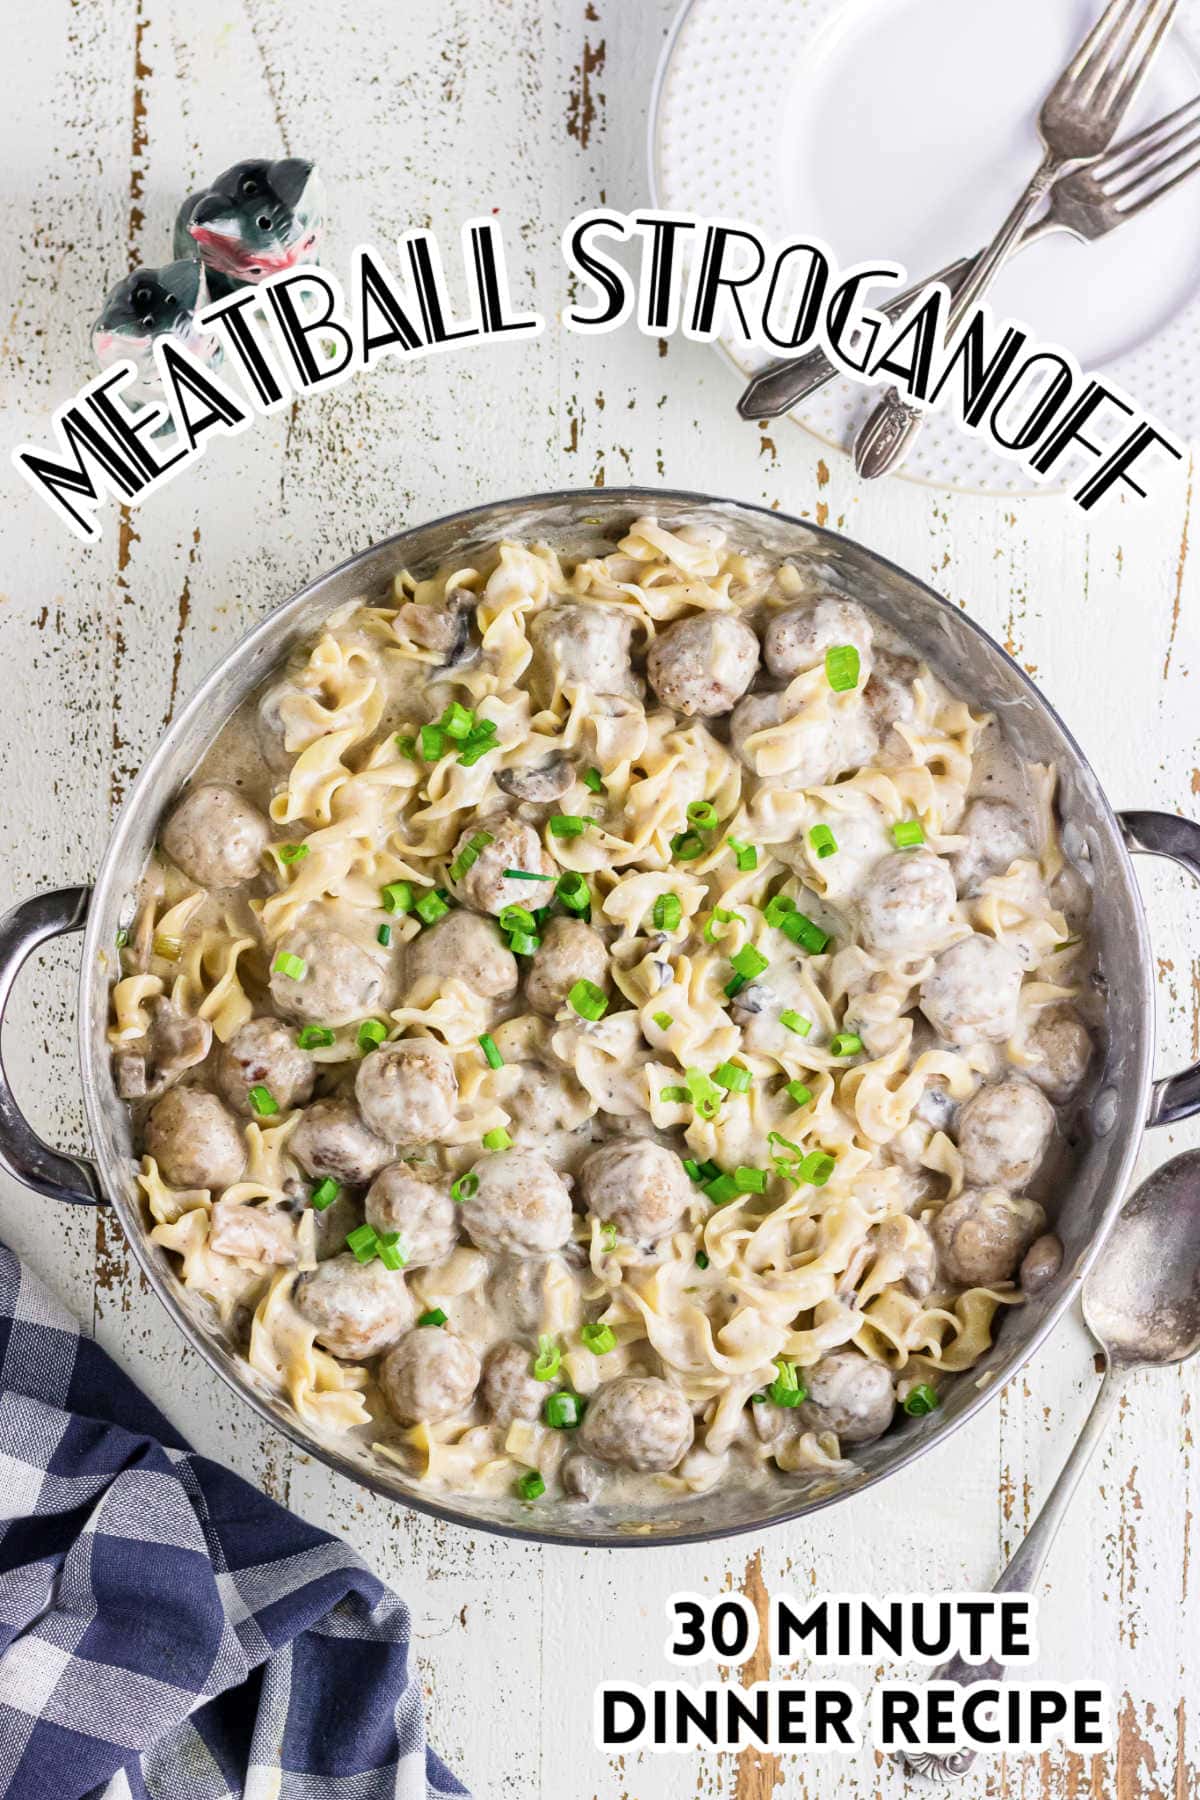 Overhead view of the meatball stroganoff in a pan. Title text overlay - this is the title image.